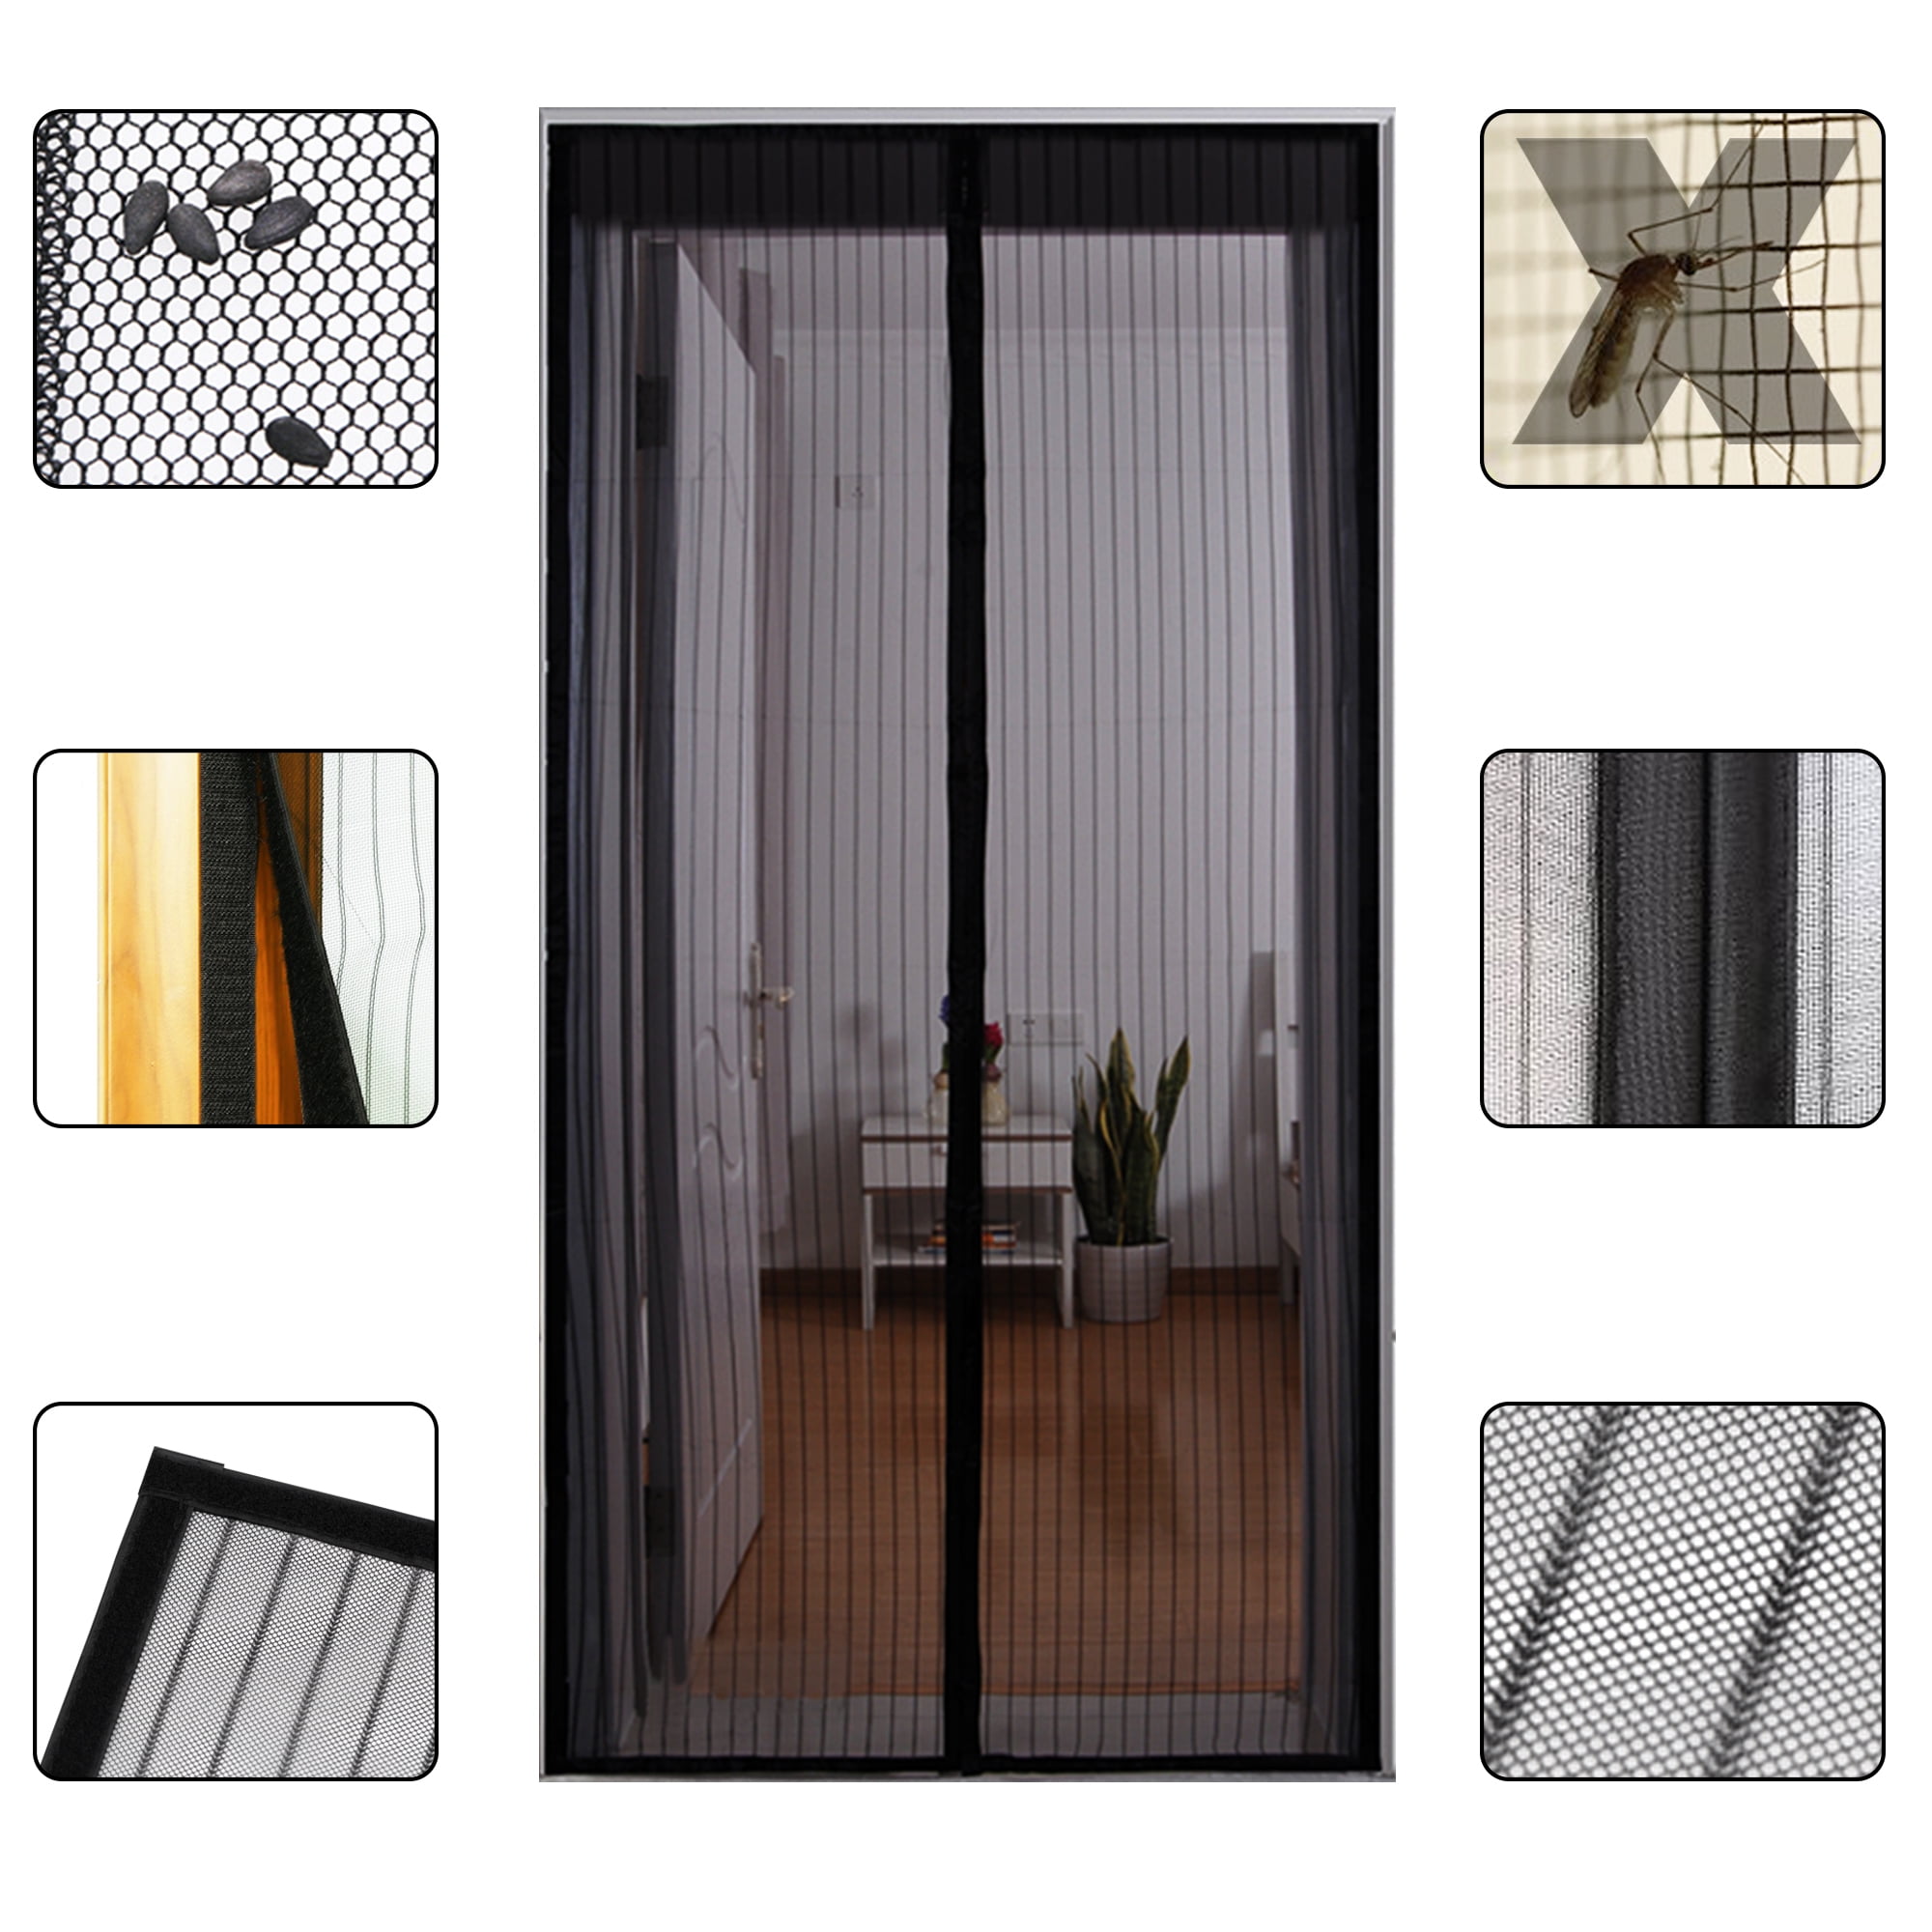 Taylor & Brown® Magnetic Flying Insect Magic Door Screen Curtain Mesh Black